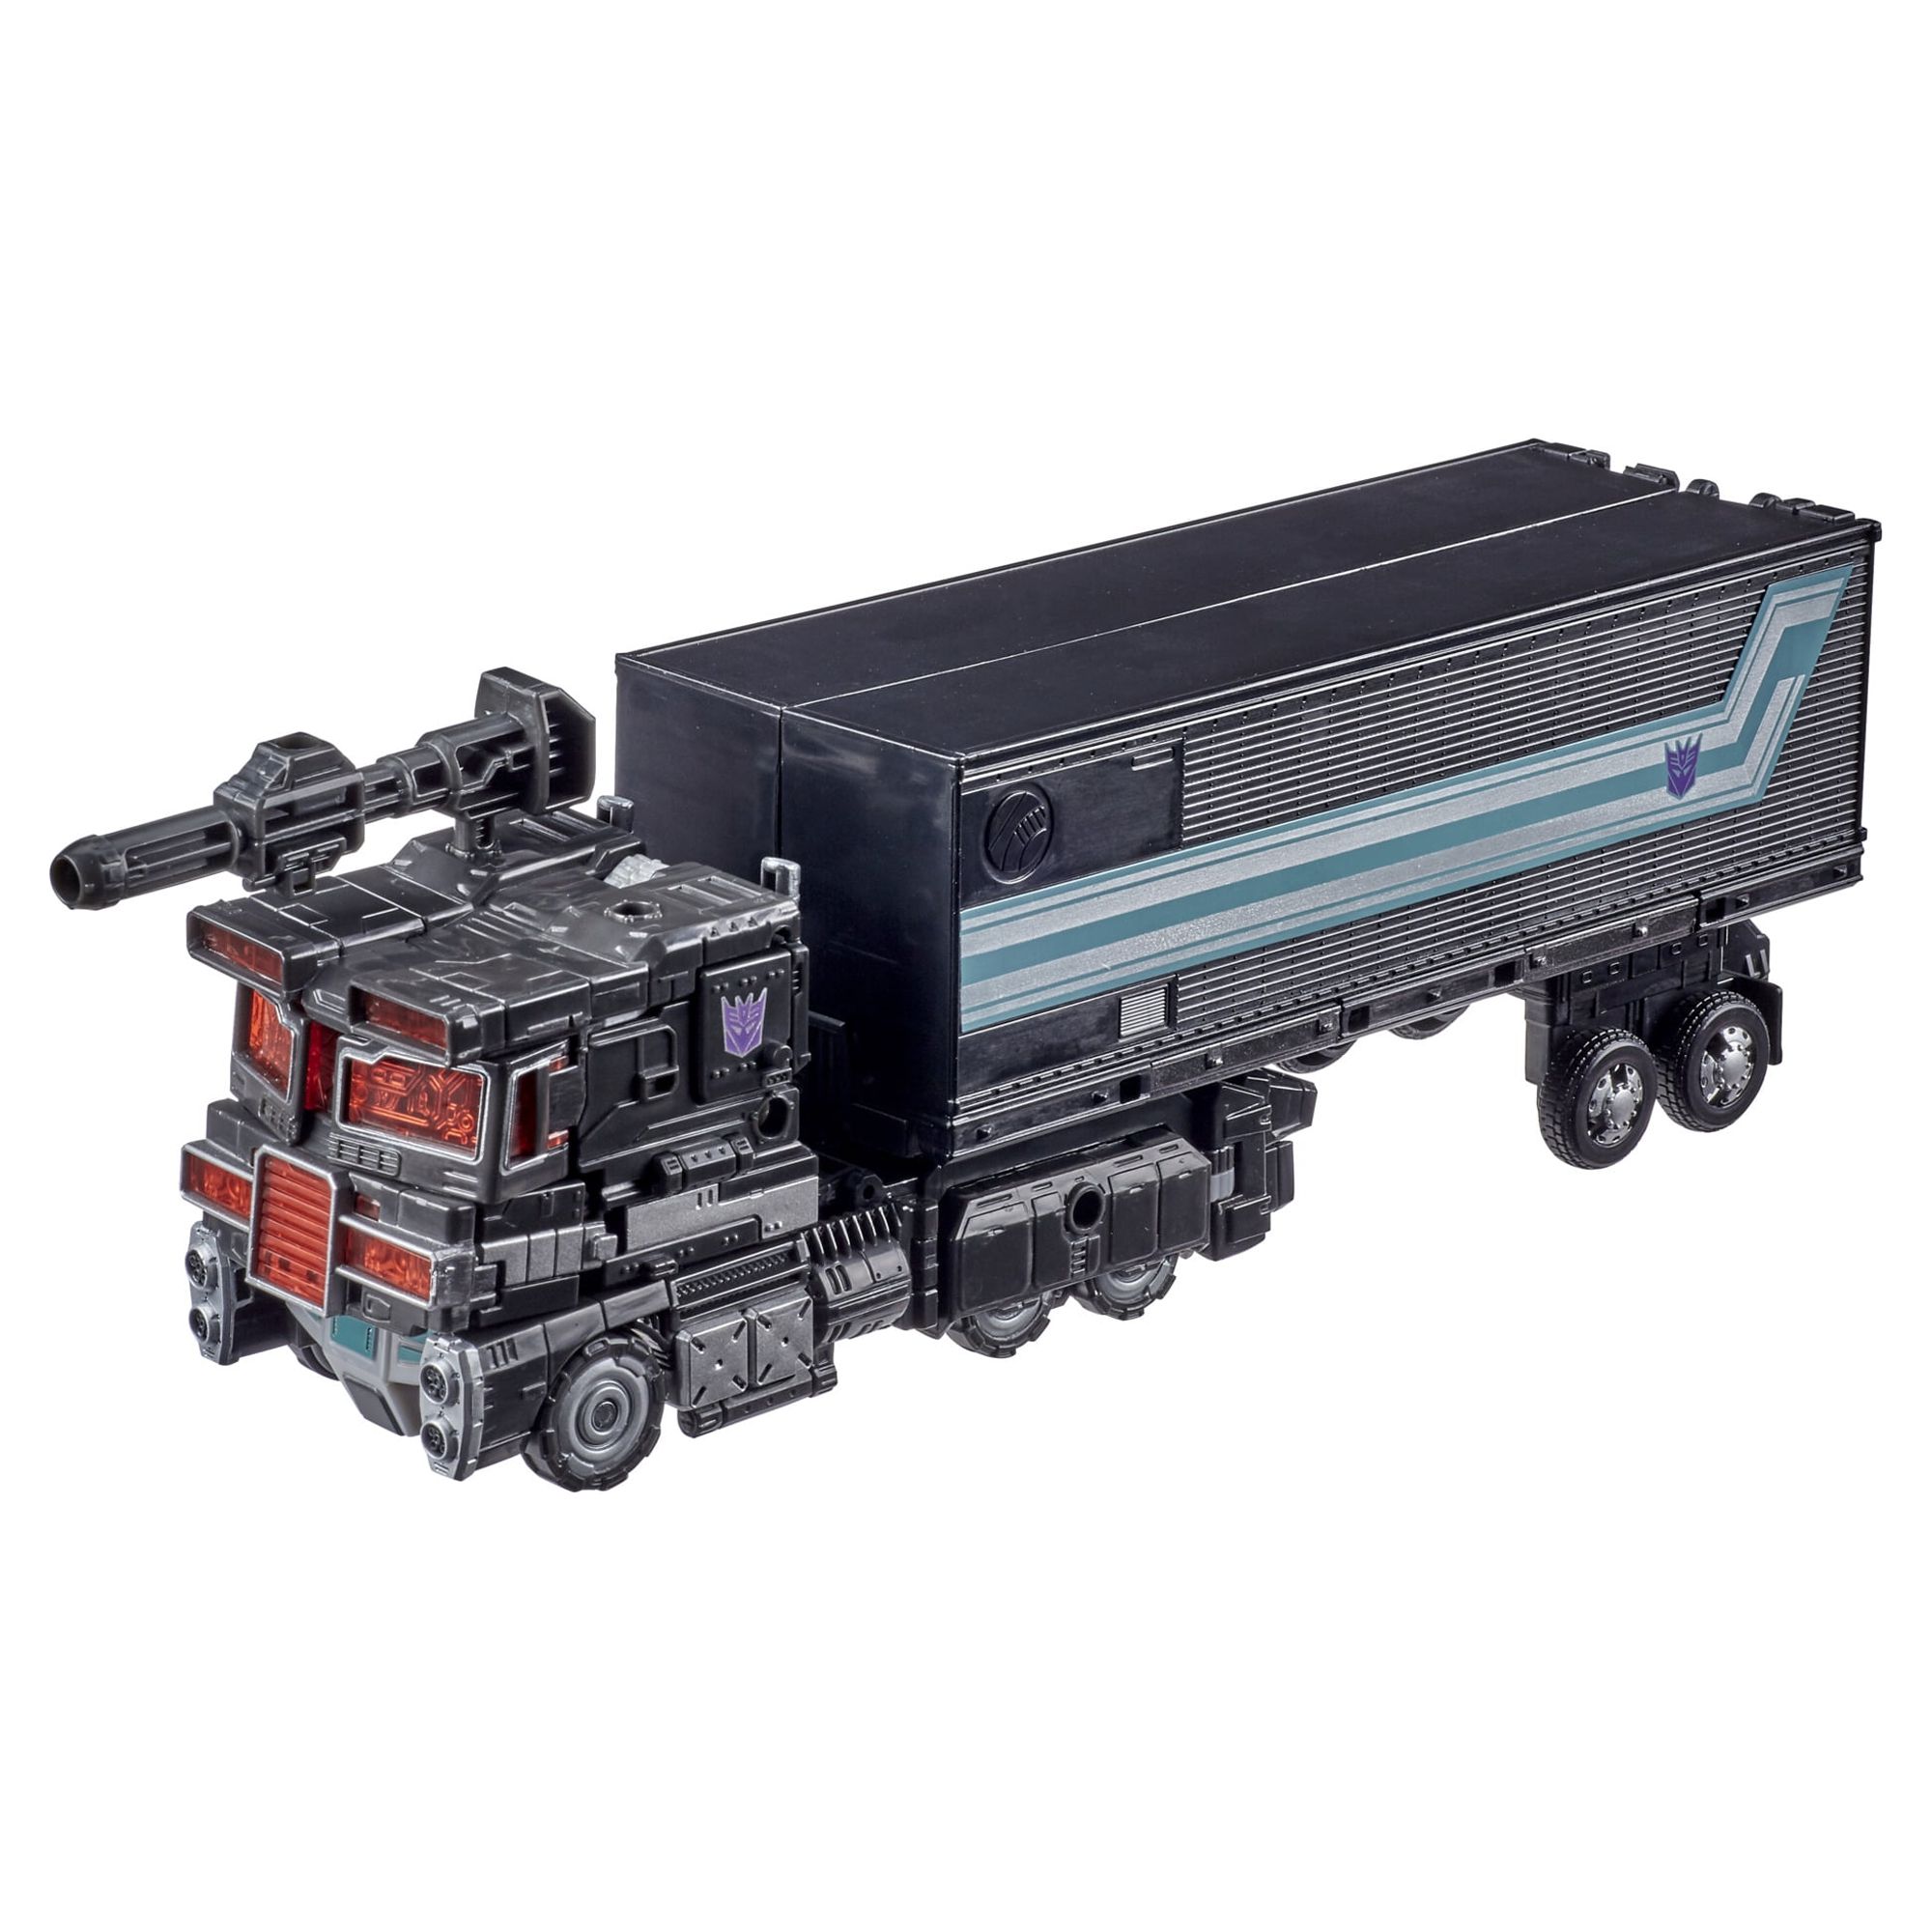 Transformers Generations War for Cybertron Series Leader Class Spoiler Pack - image 3 of 5